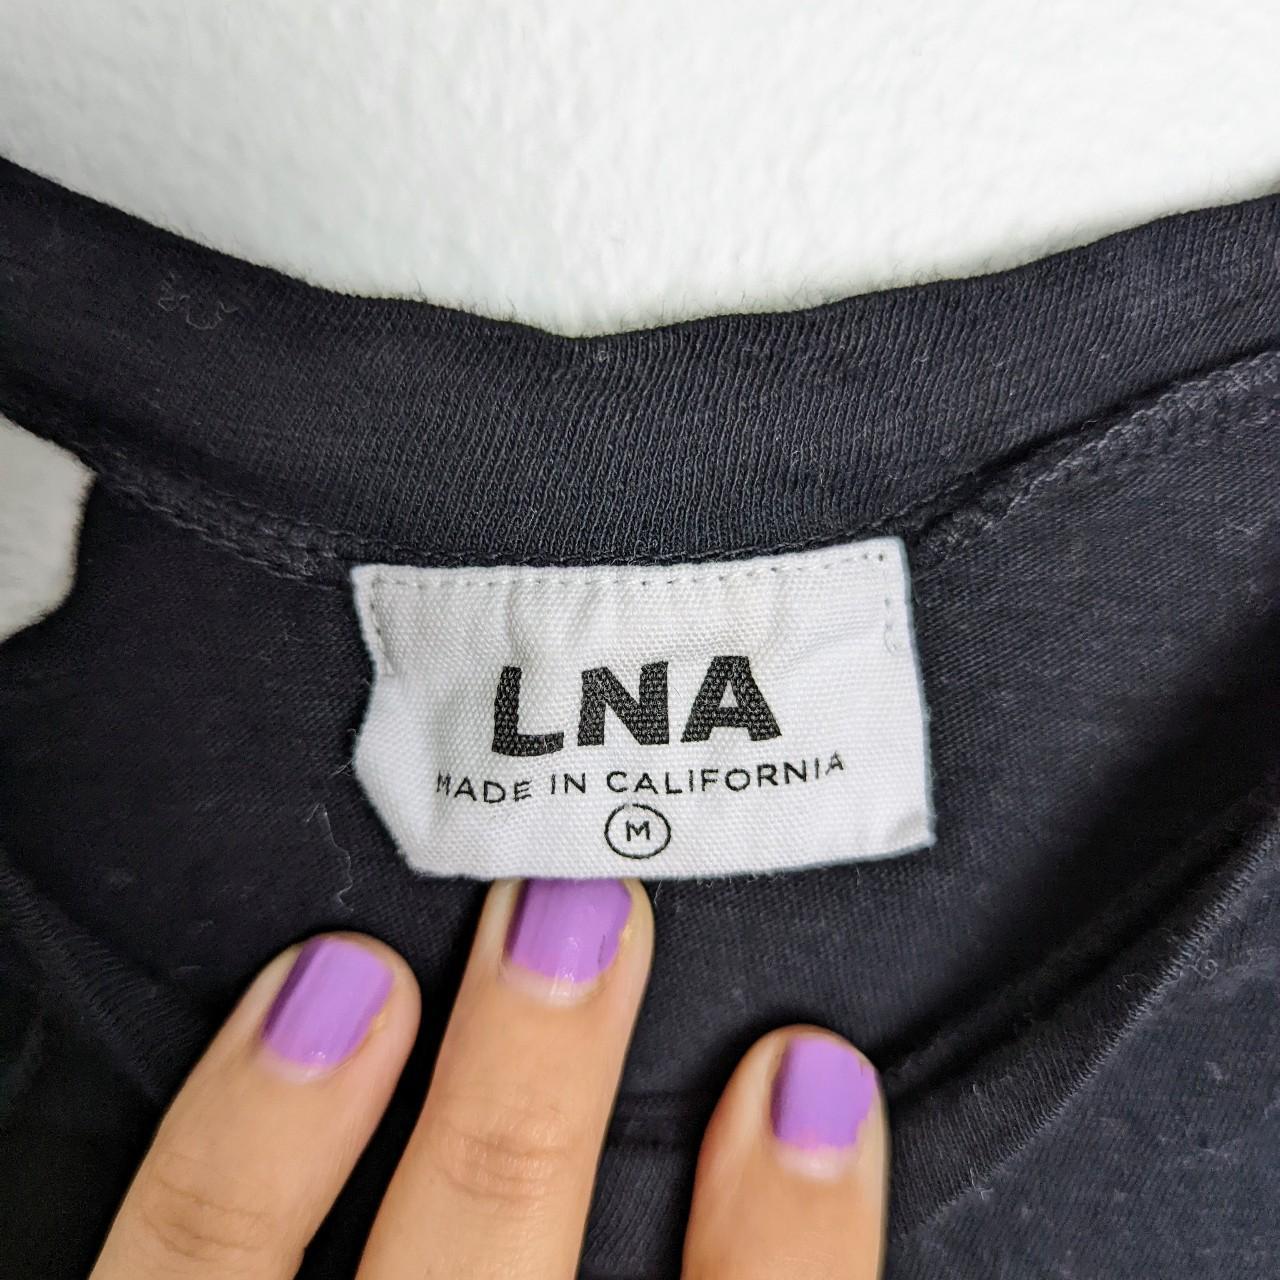 Product Image 2 - LNA Clothing sold on Revolve